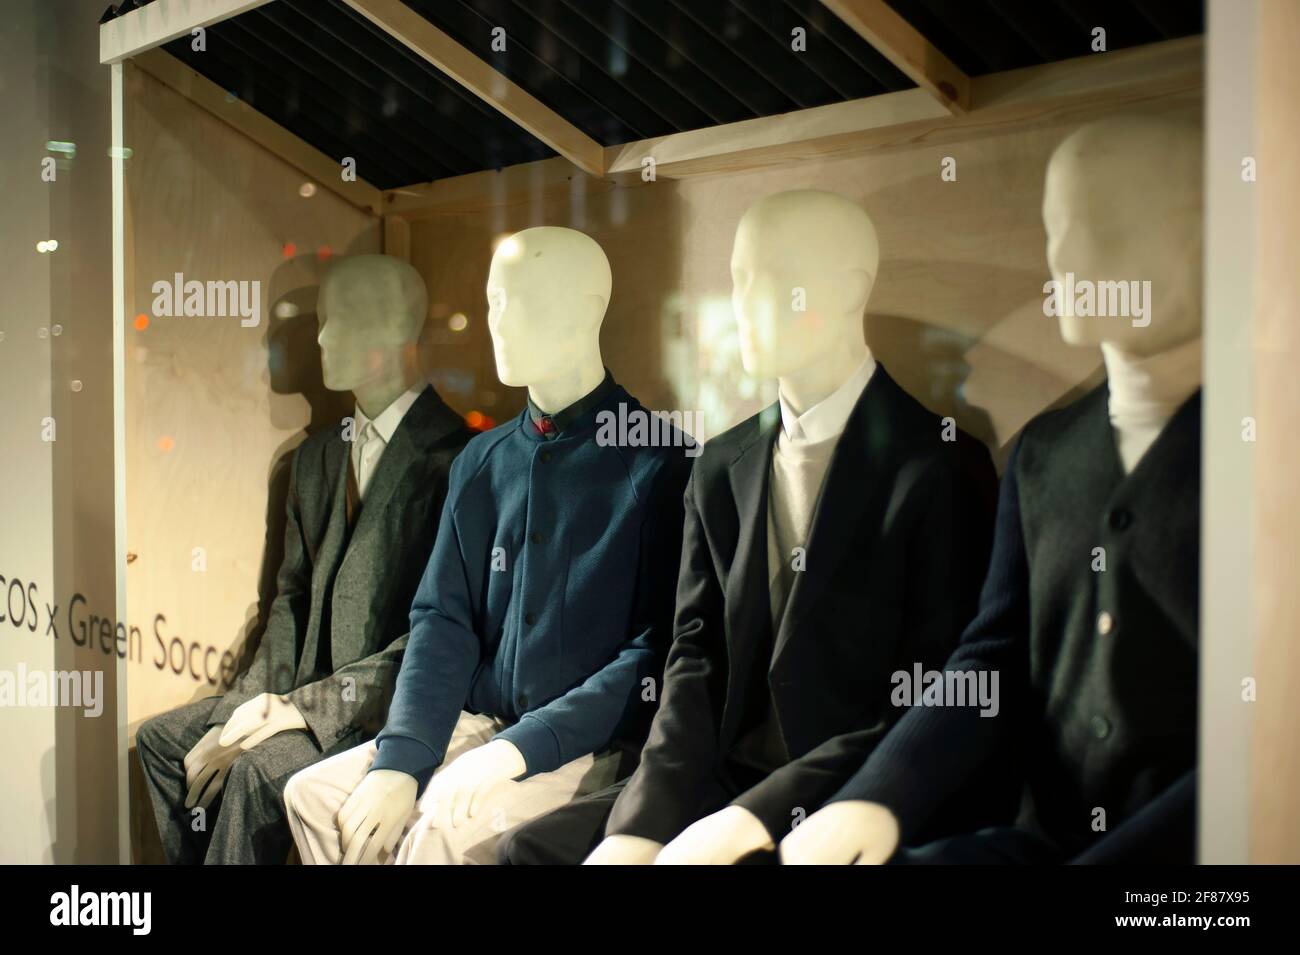 Male mannequins in fine retail shop window, shot at night. Smart wear trends in Central London, UK. Sep 2012 Stock Photo